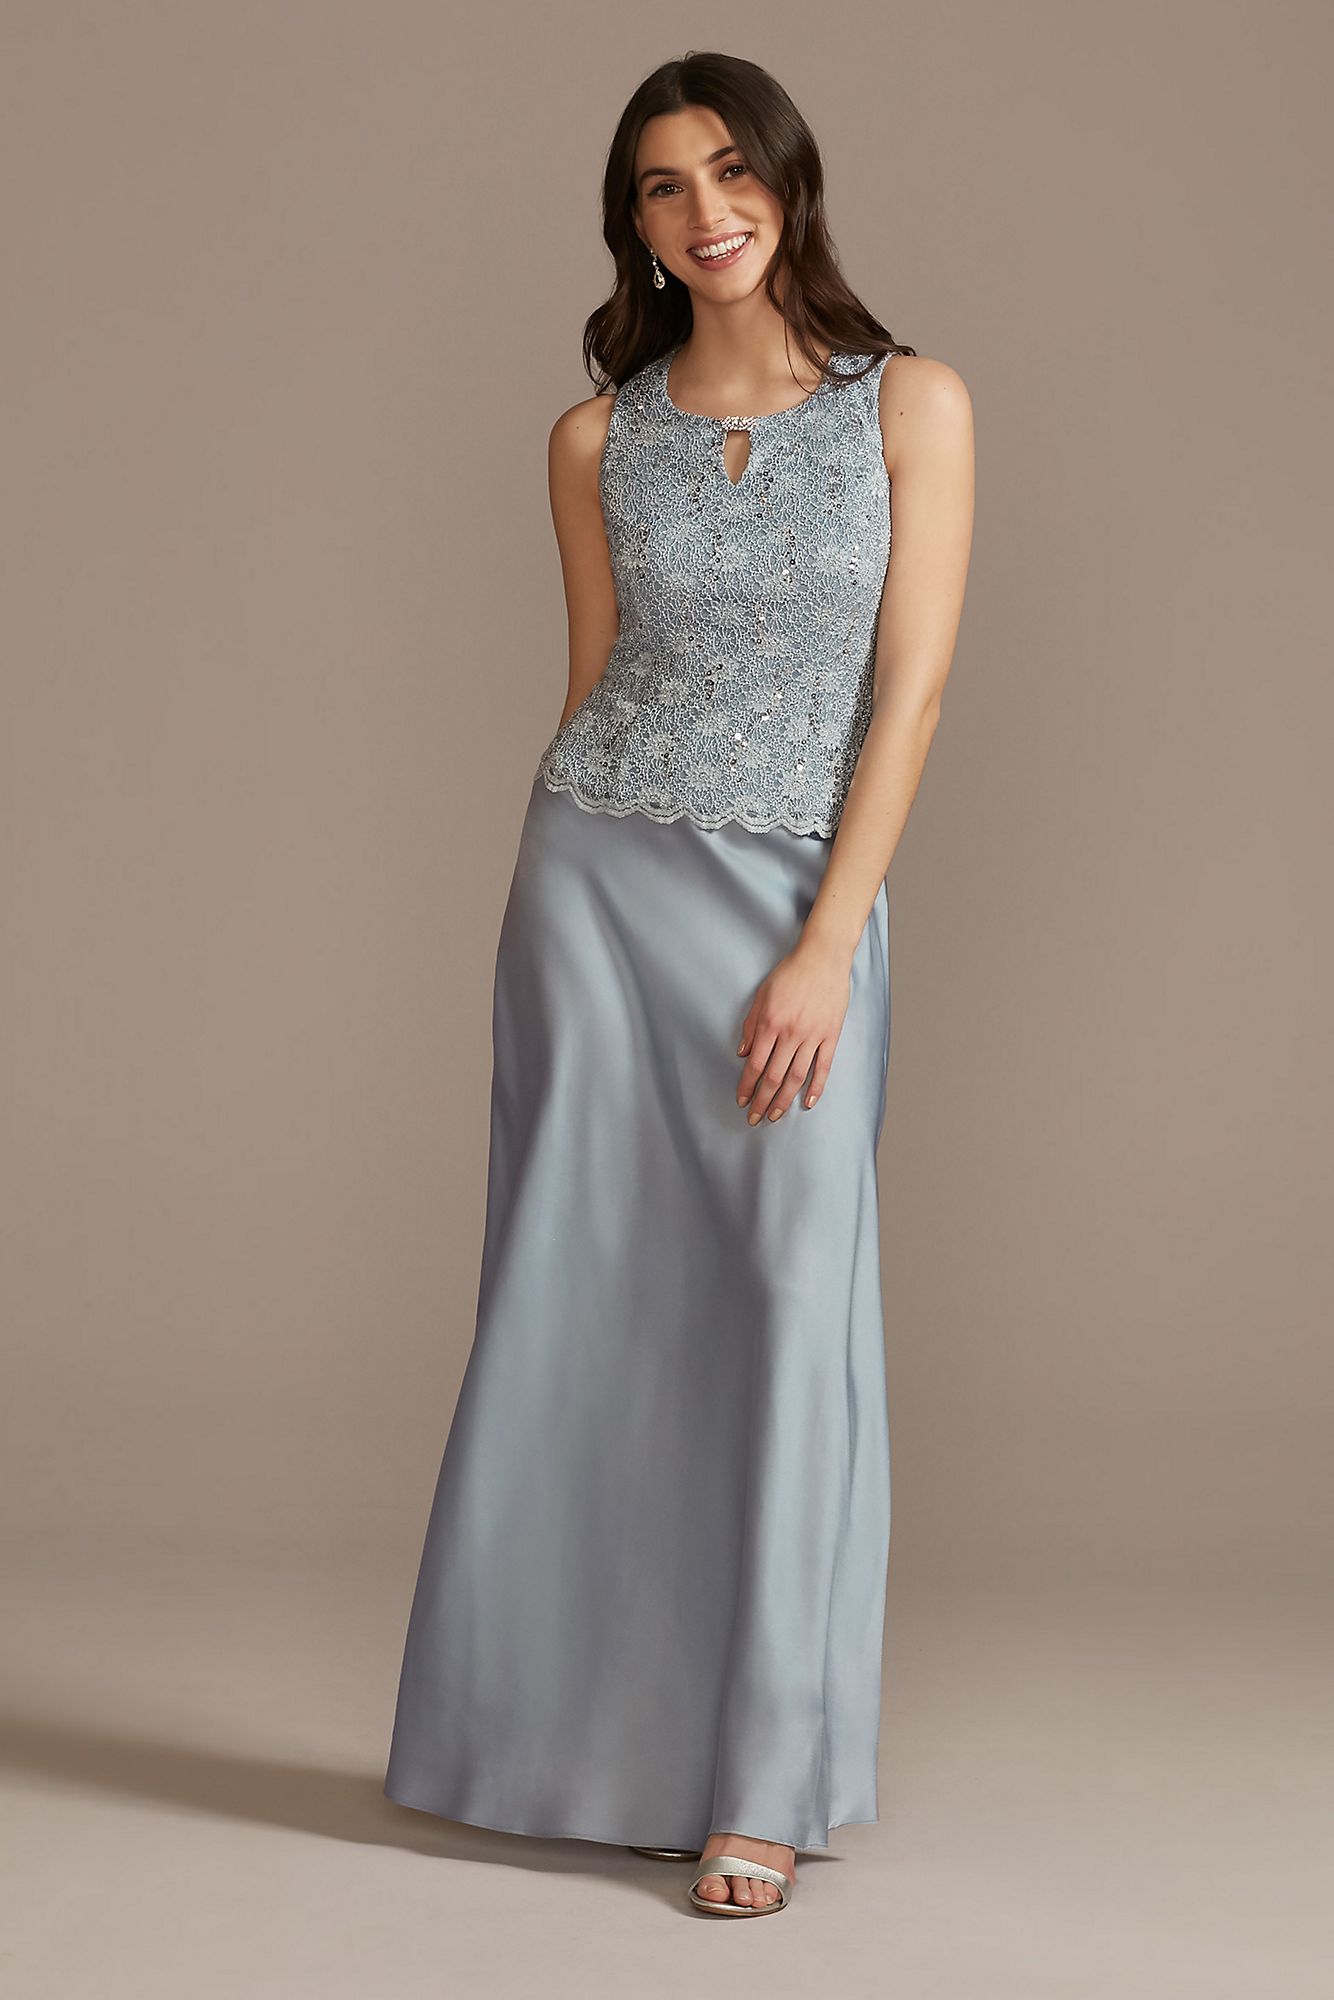 Flowy A-Line Dress with Lace Bodice and Jacket RM Richards 7739